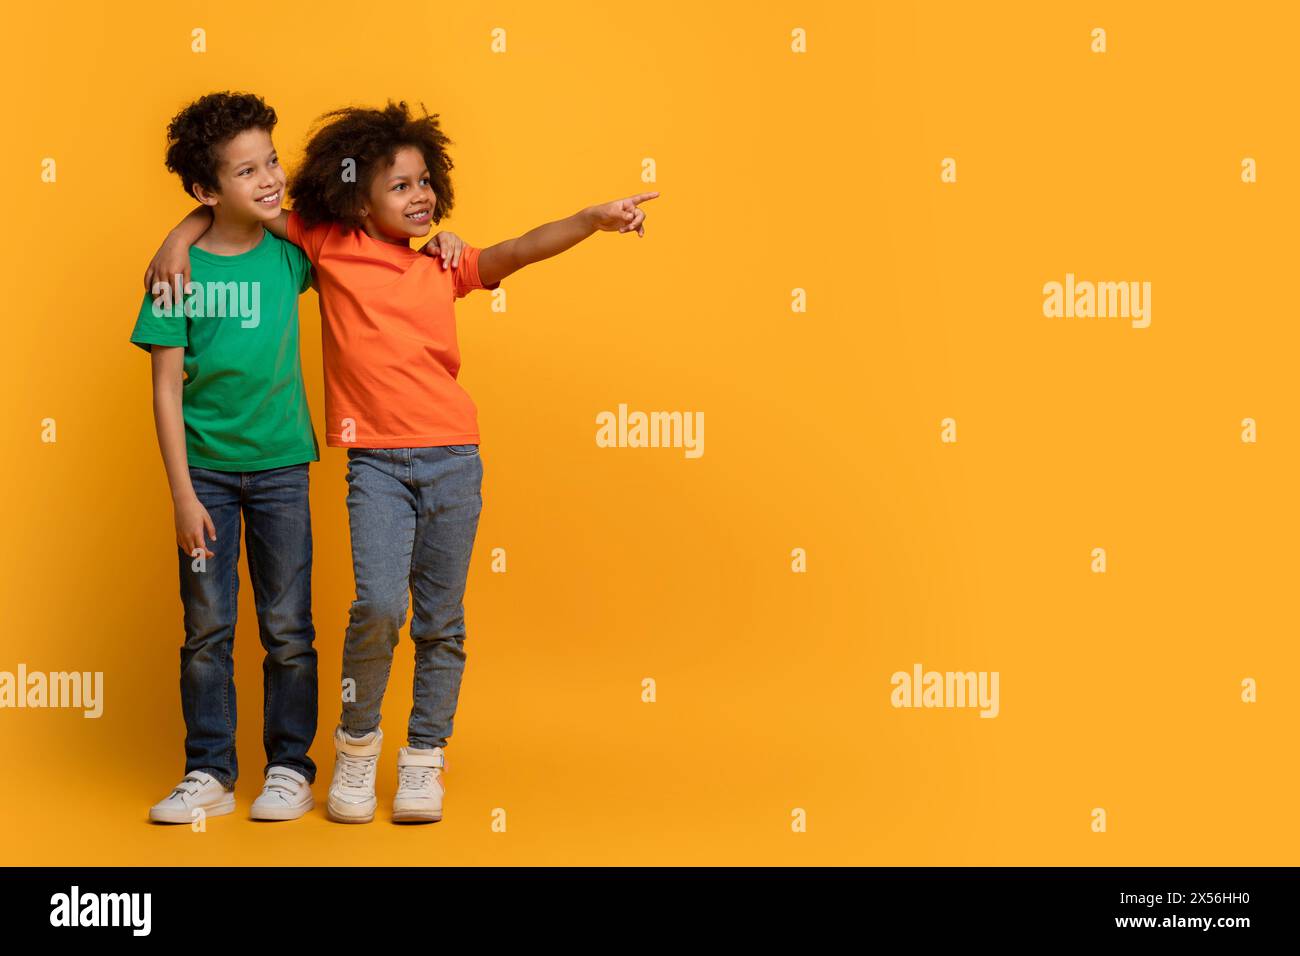 Two Joyful Children Pointing and Looking at Copy Space Stock Photo